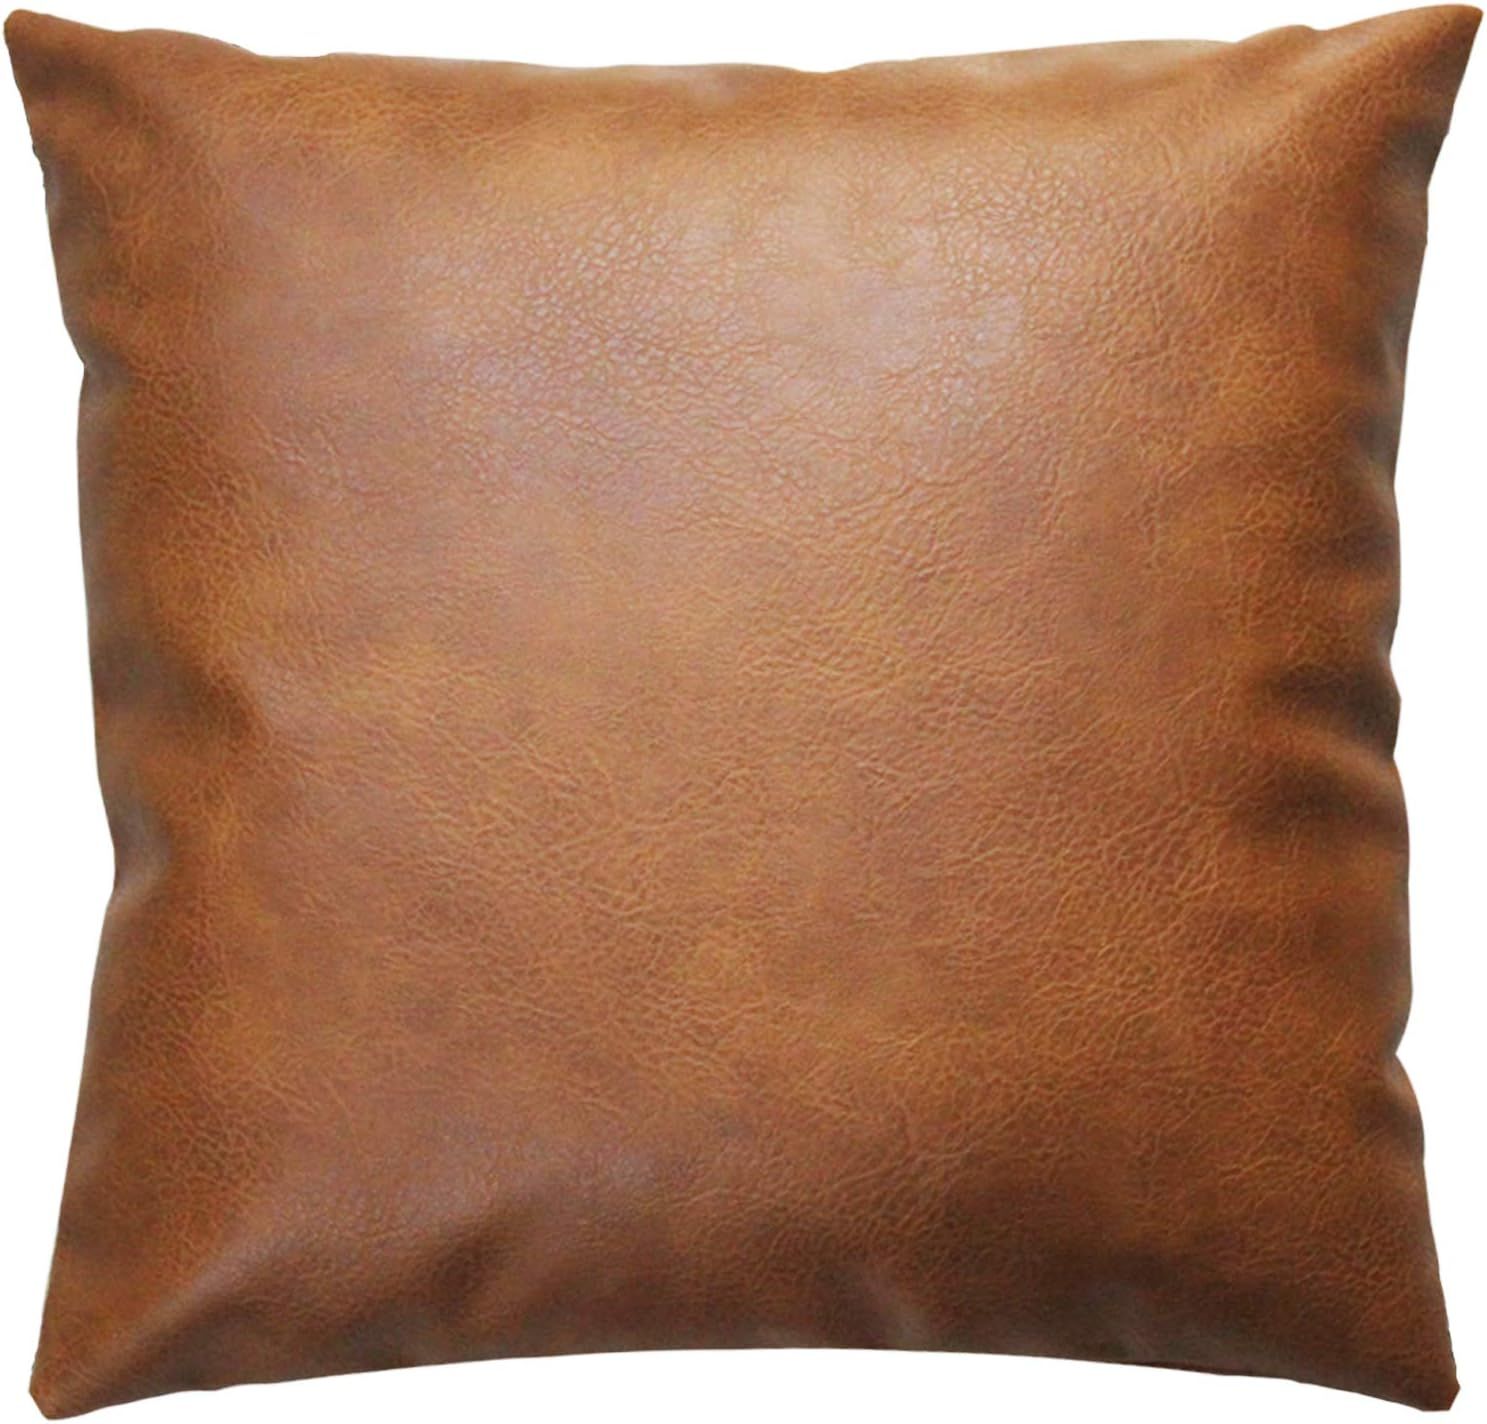 JOJUSIS Modern Leather Throw Pillow Cover for Couch Sofa Bed 20 x 20 Inch 100% Faux Leather | Amazon (US)